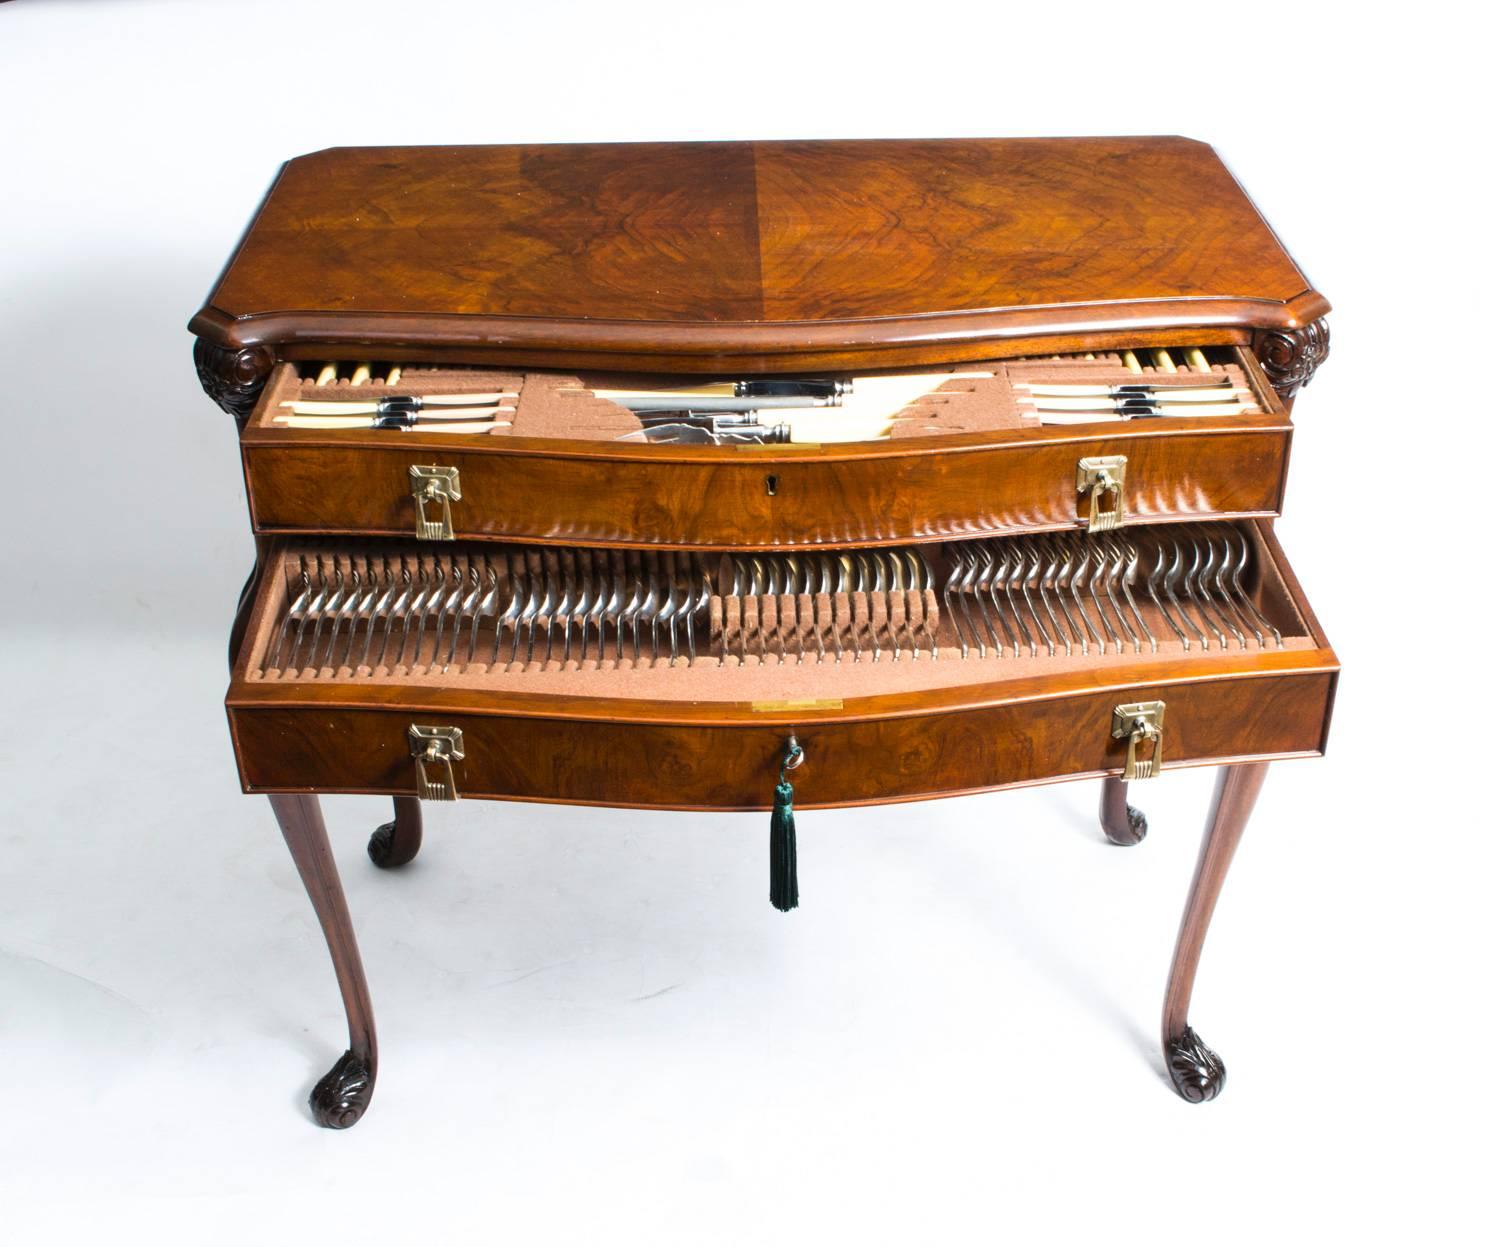 This is a huge canteen comprising 136 pieces of cutlery by James Deakin & Sons, Sheffield.

It is housed in its beautiful original antique, solid walnut and burr walnut, fully fitted cabinet. It has two beautifully fitted drawers with original